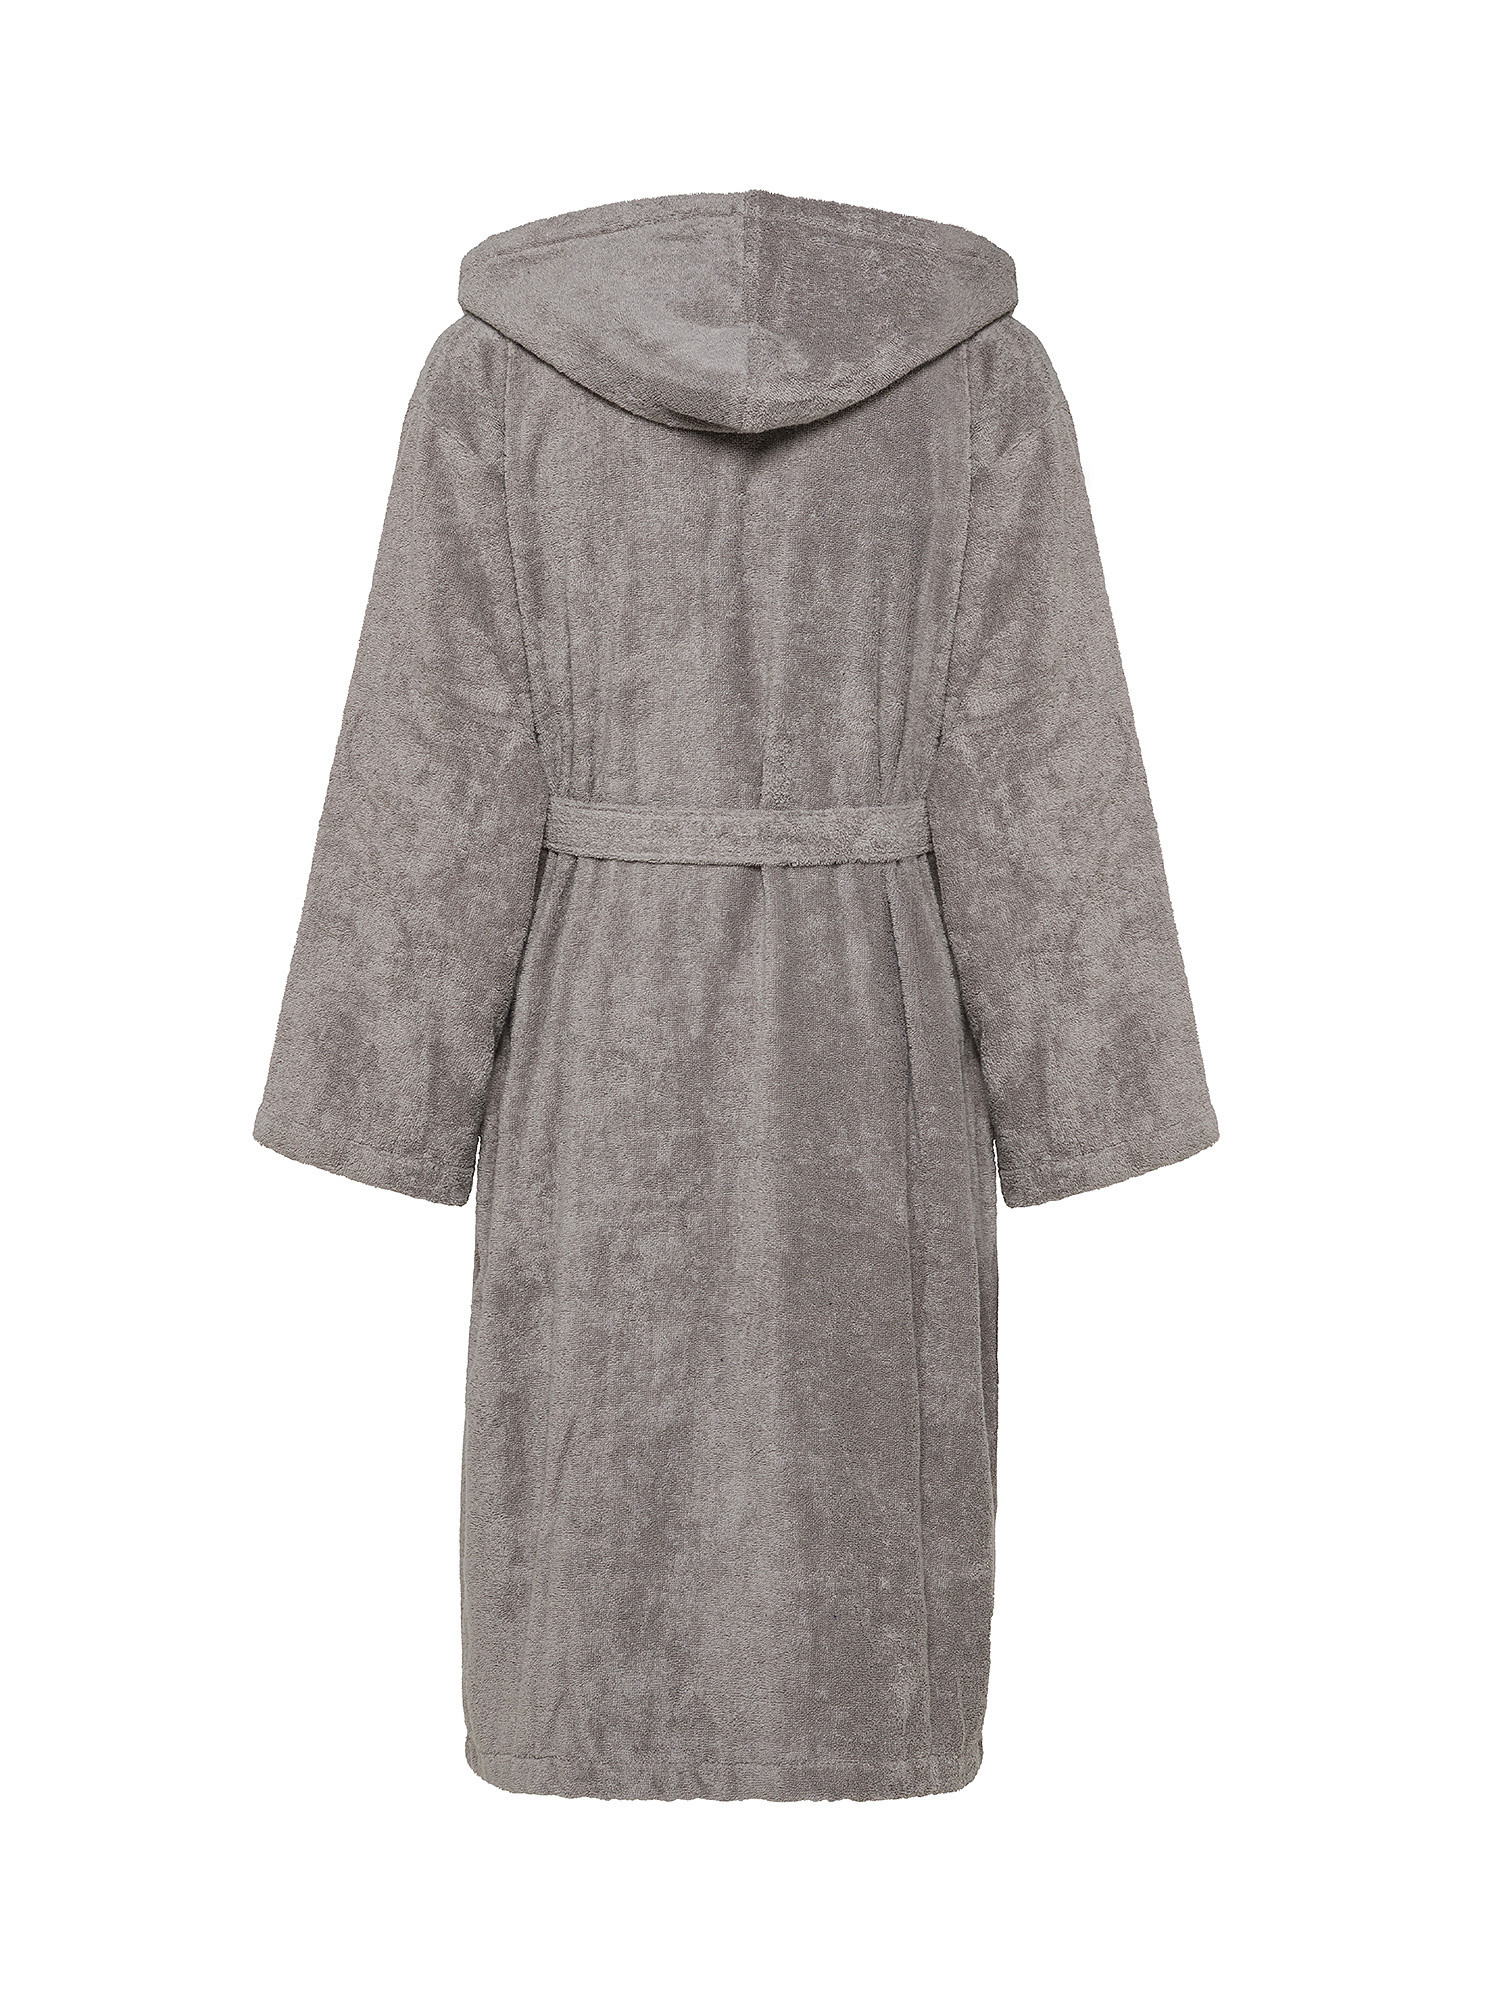 Zefiro solid color 100% cotton bathrobe, Grey, large image number 1